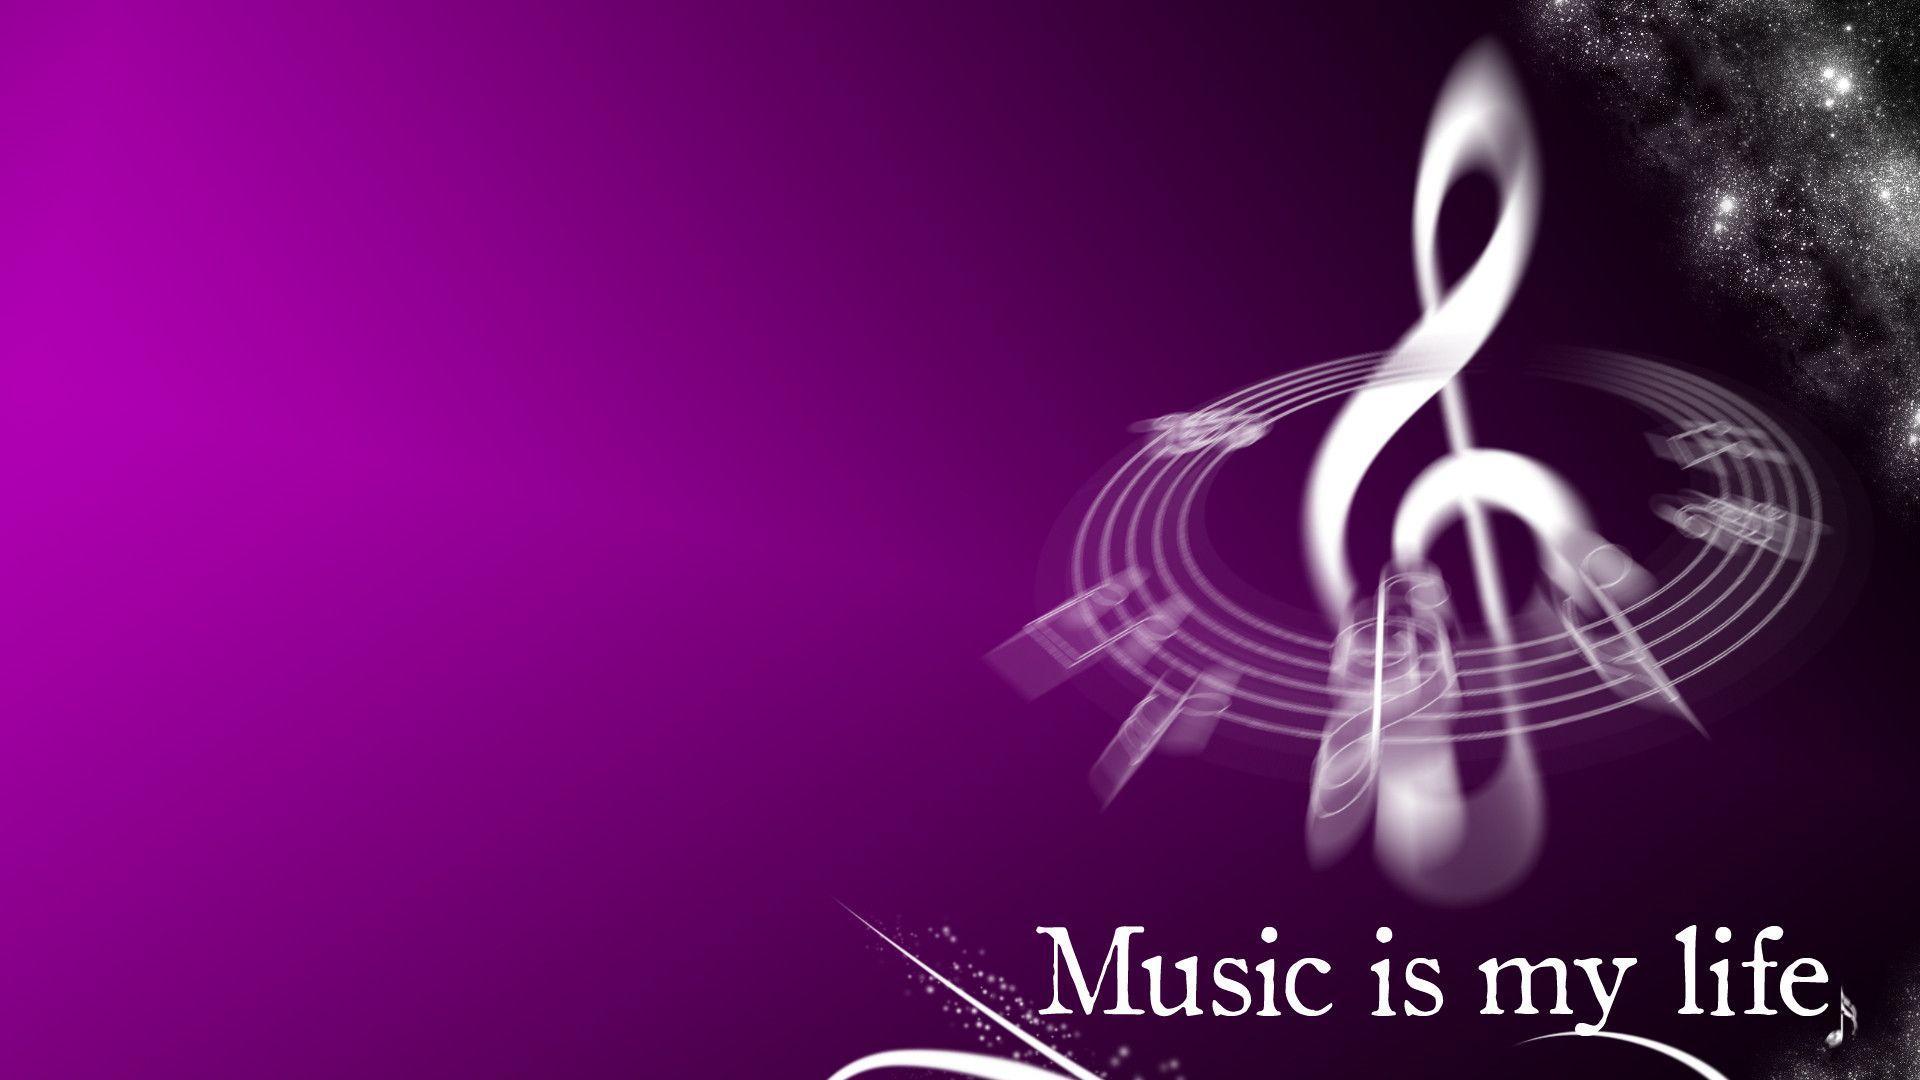 Wallpapers For > Music Is My Life Wallpapers Guitar